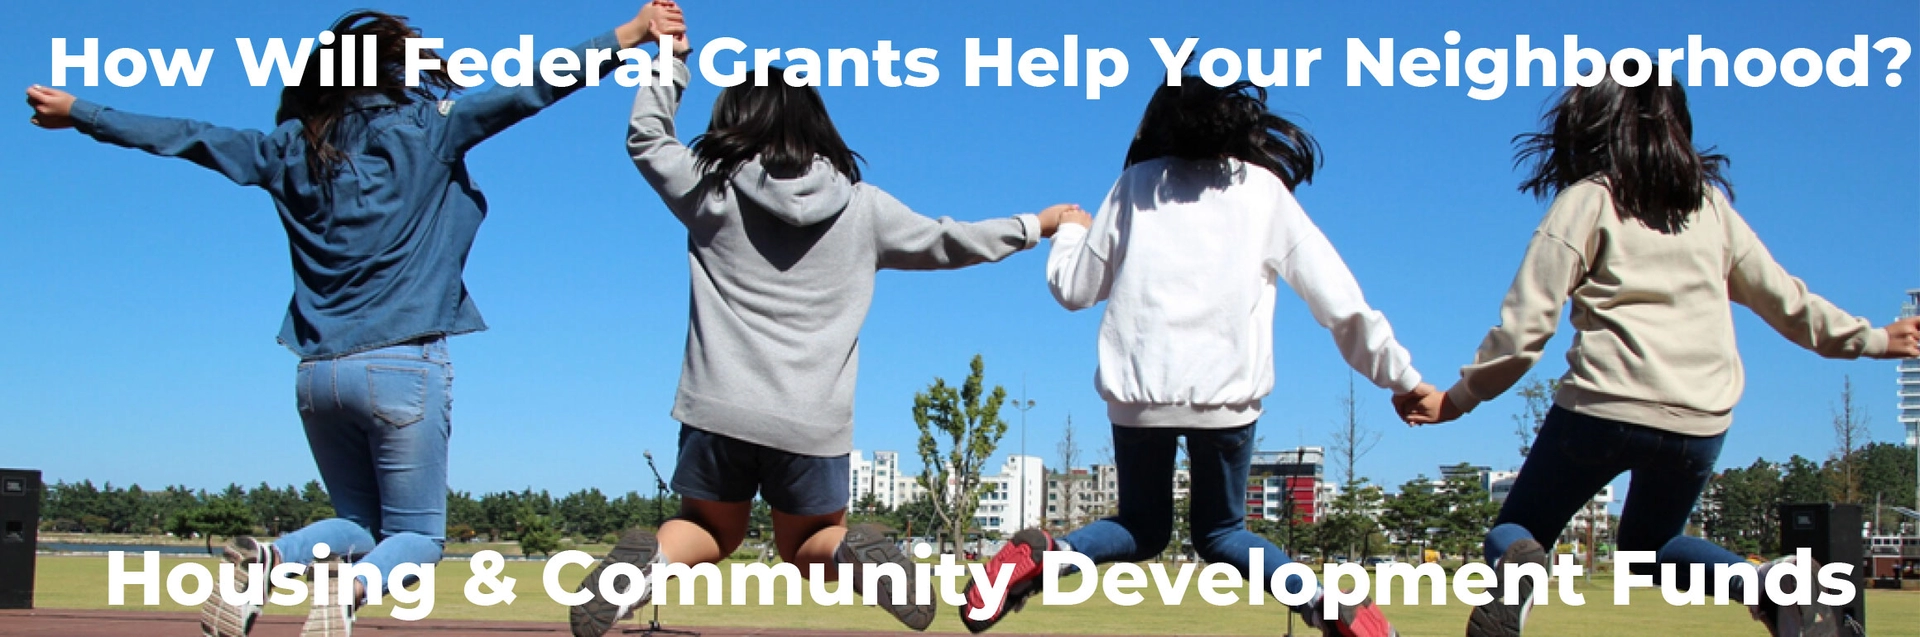 Community Investment for Families Department Meeting Banner